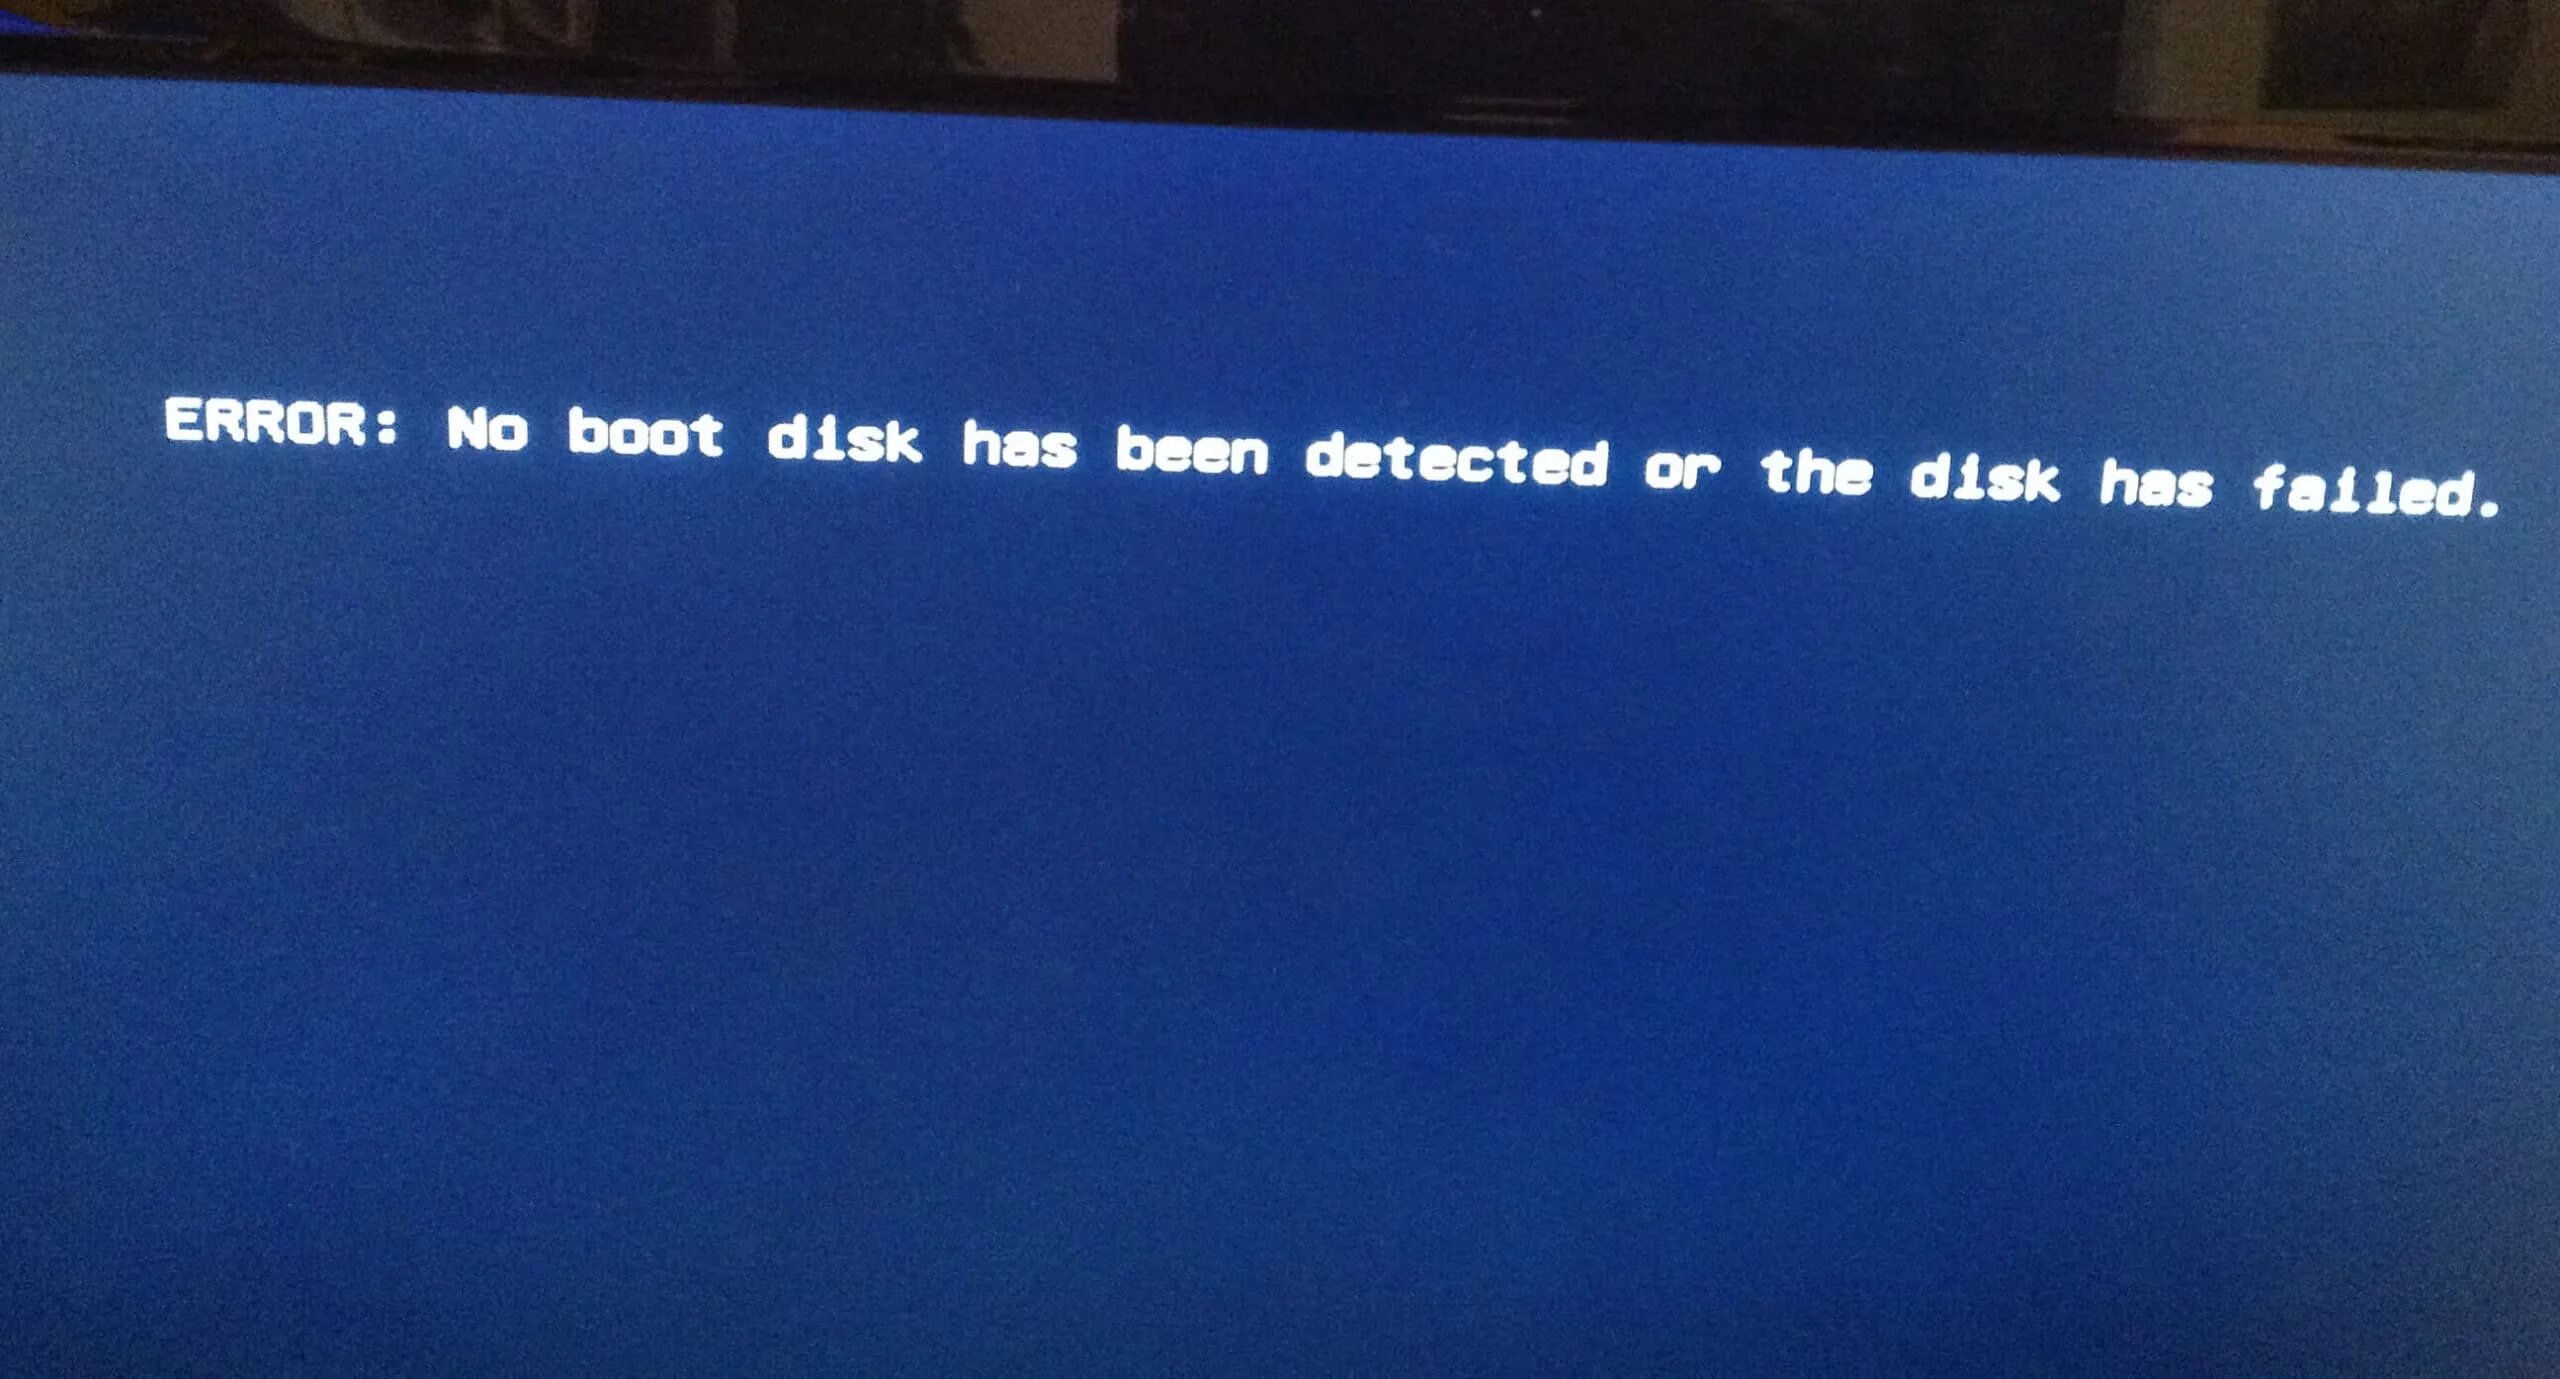 Ошибка загрузки на диск. No Boot Disk has been detected. No Boot Disk has been detected or the Disk has failed. Disk Boot failure. Disk Boot failure detected.